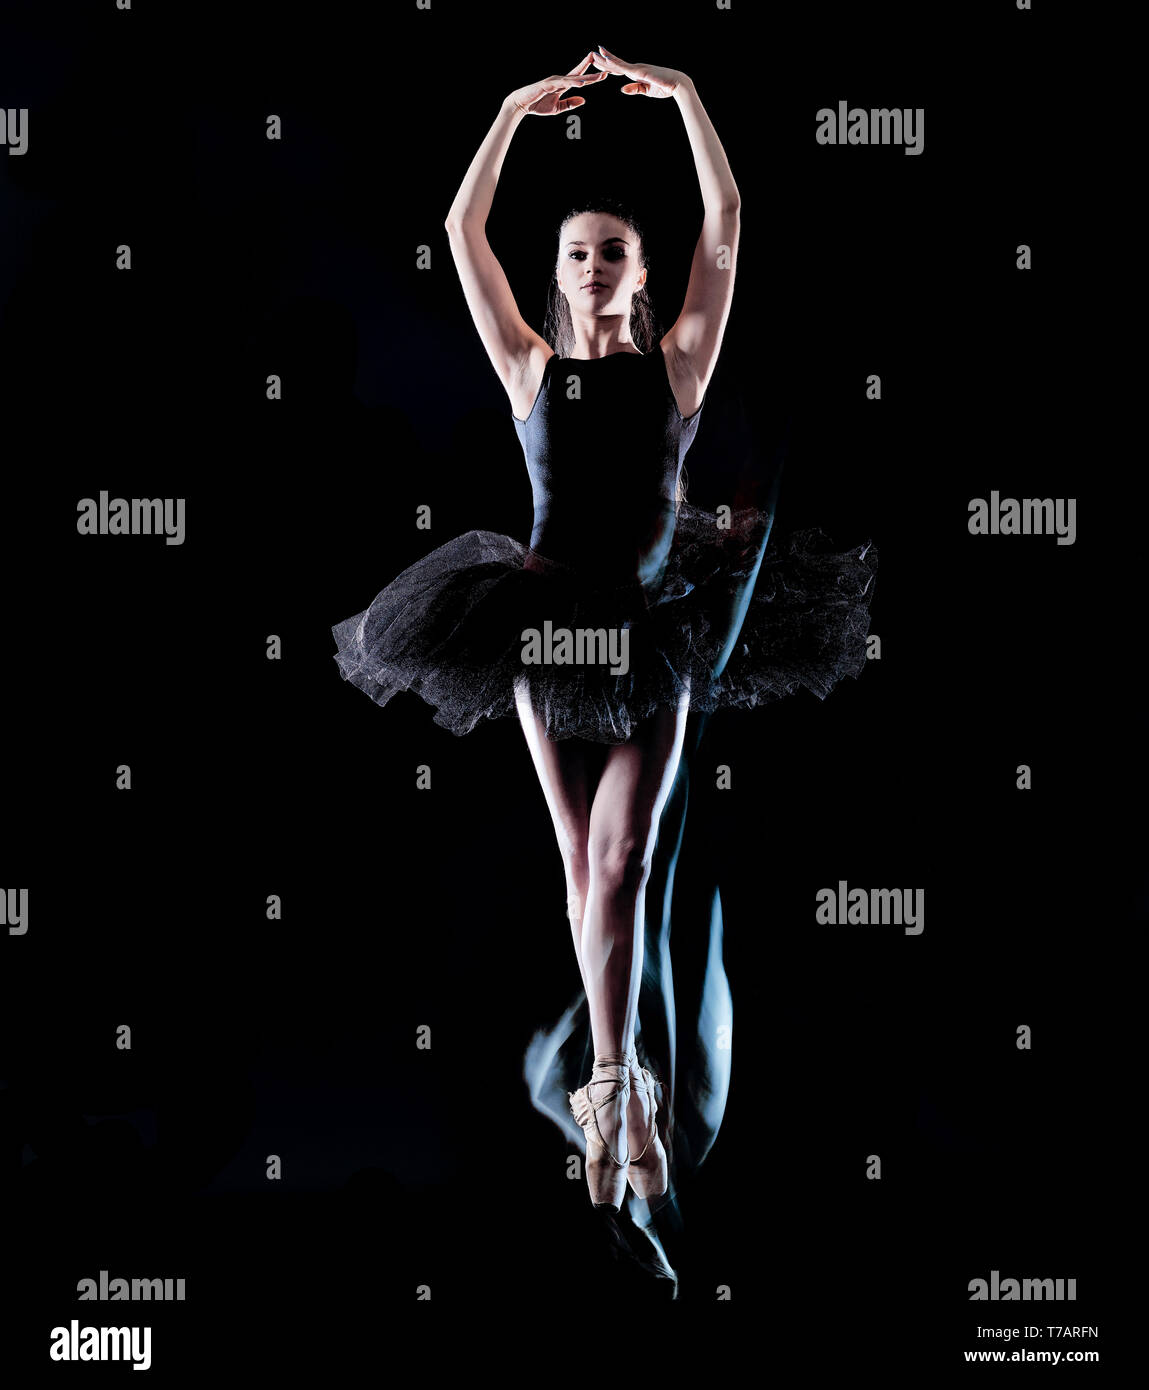 one caucasian young woman ballerina dancer dancing isolated on black background with  light painting motion blur speed effect Stock Photo